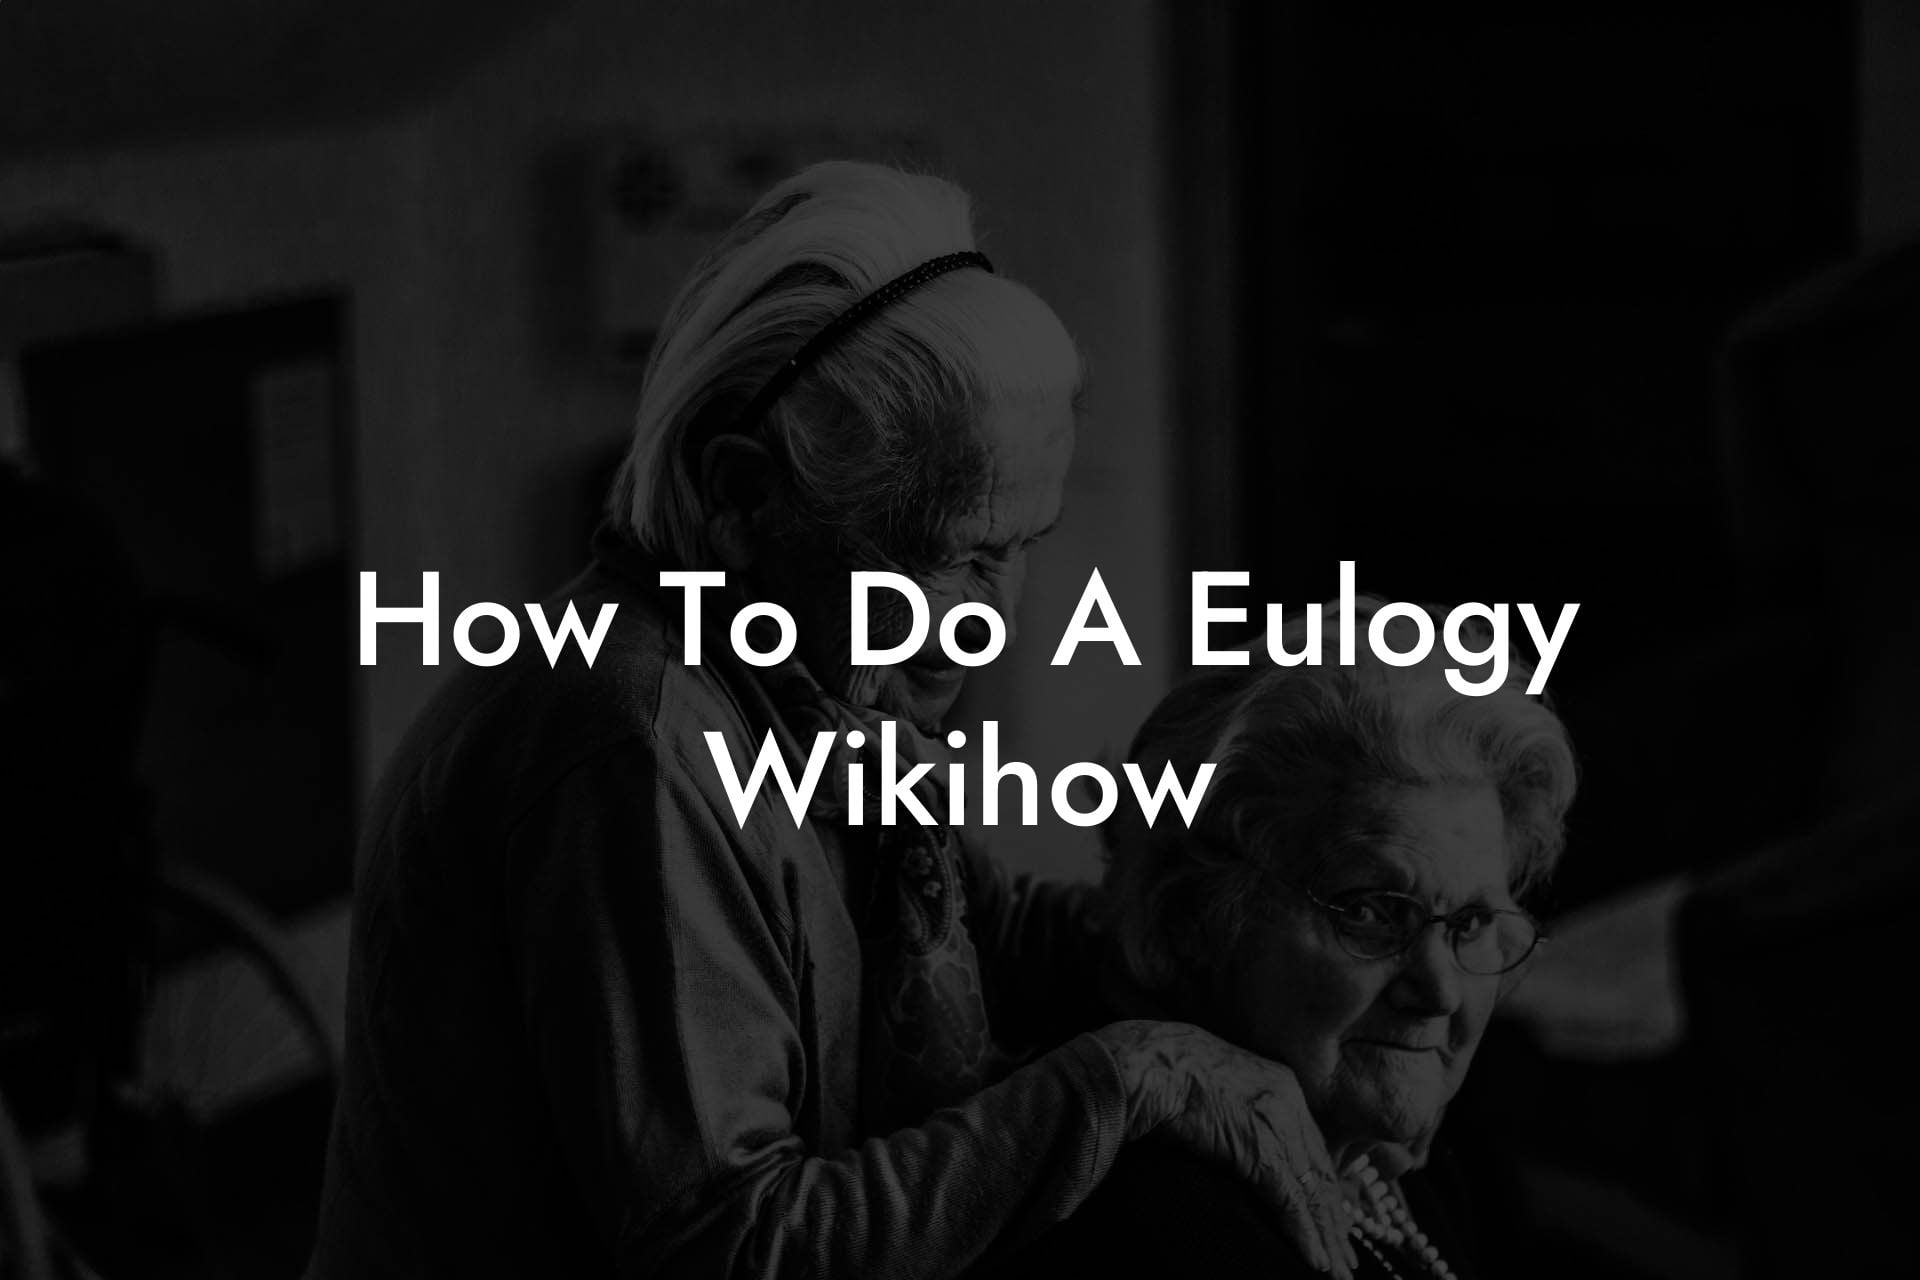 How To Do A Eulogy Wikihow